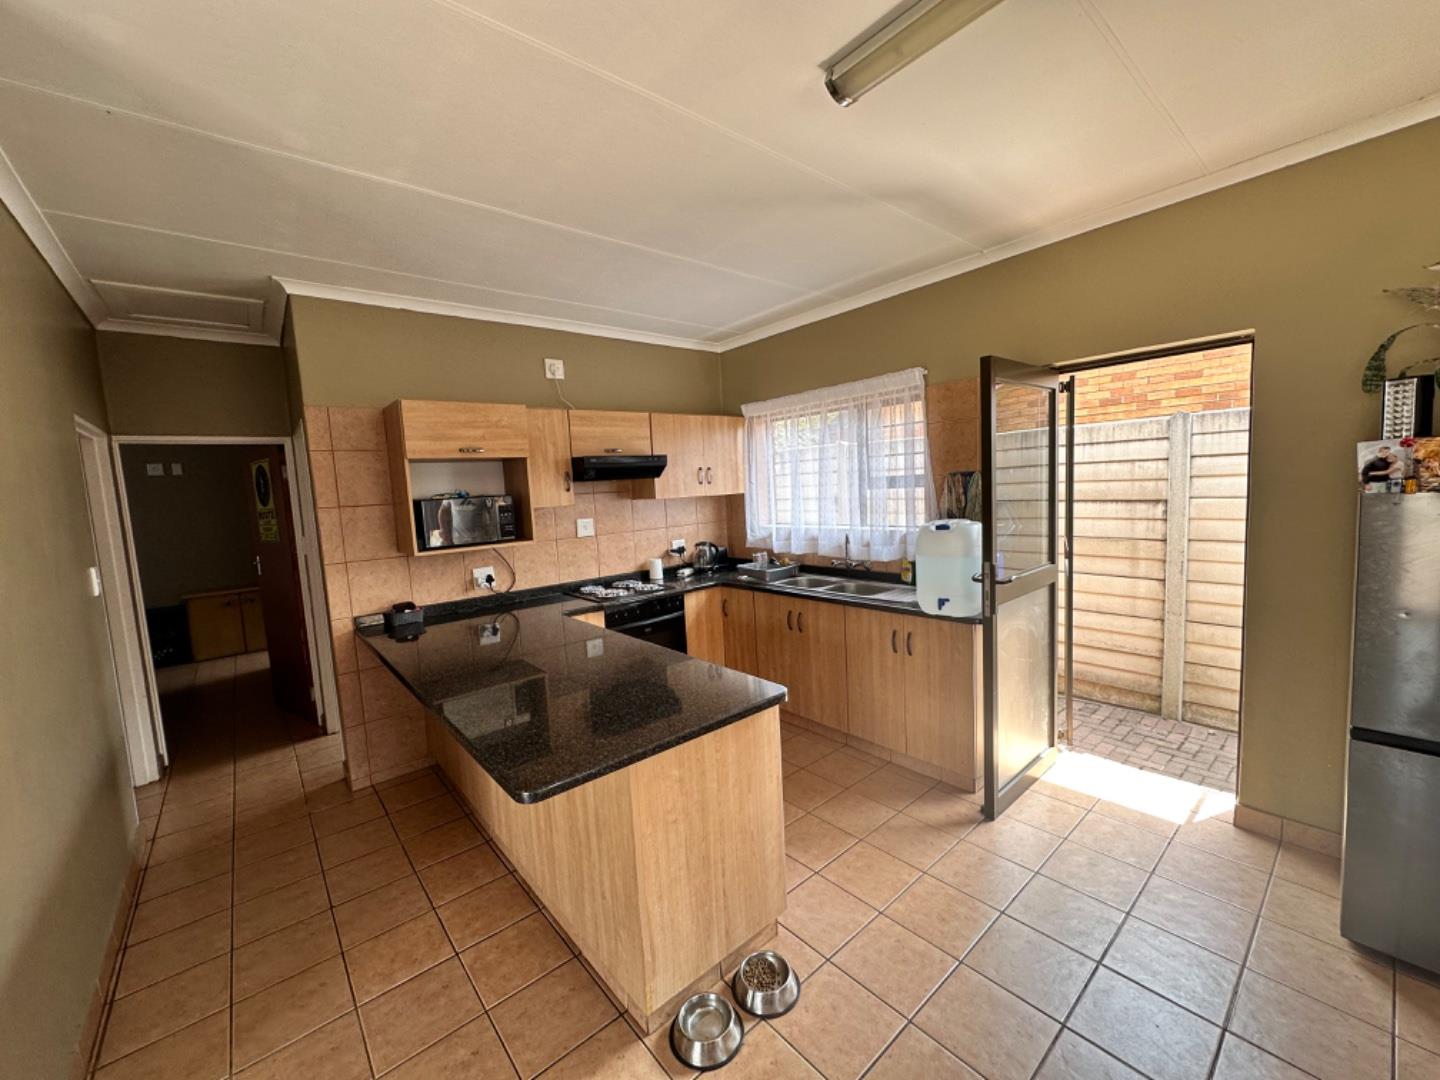 2 Bedroom Apartment / flat to rent in Ermelo